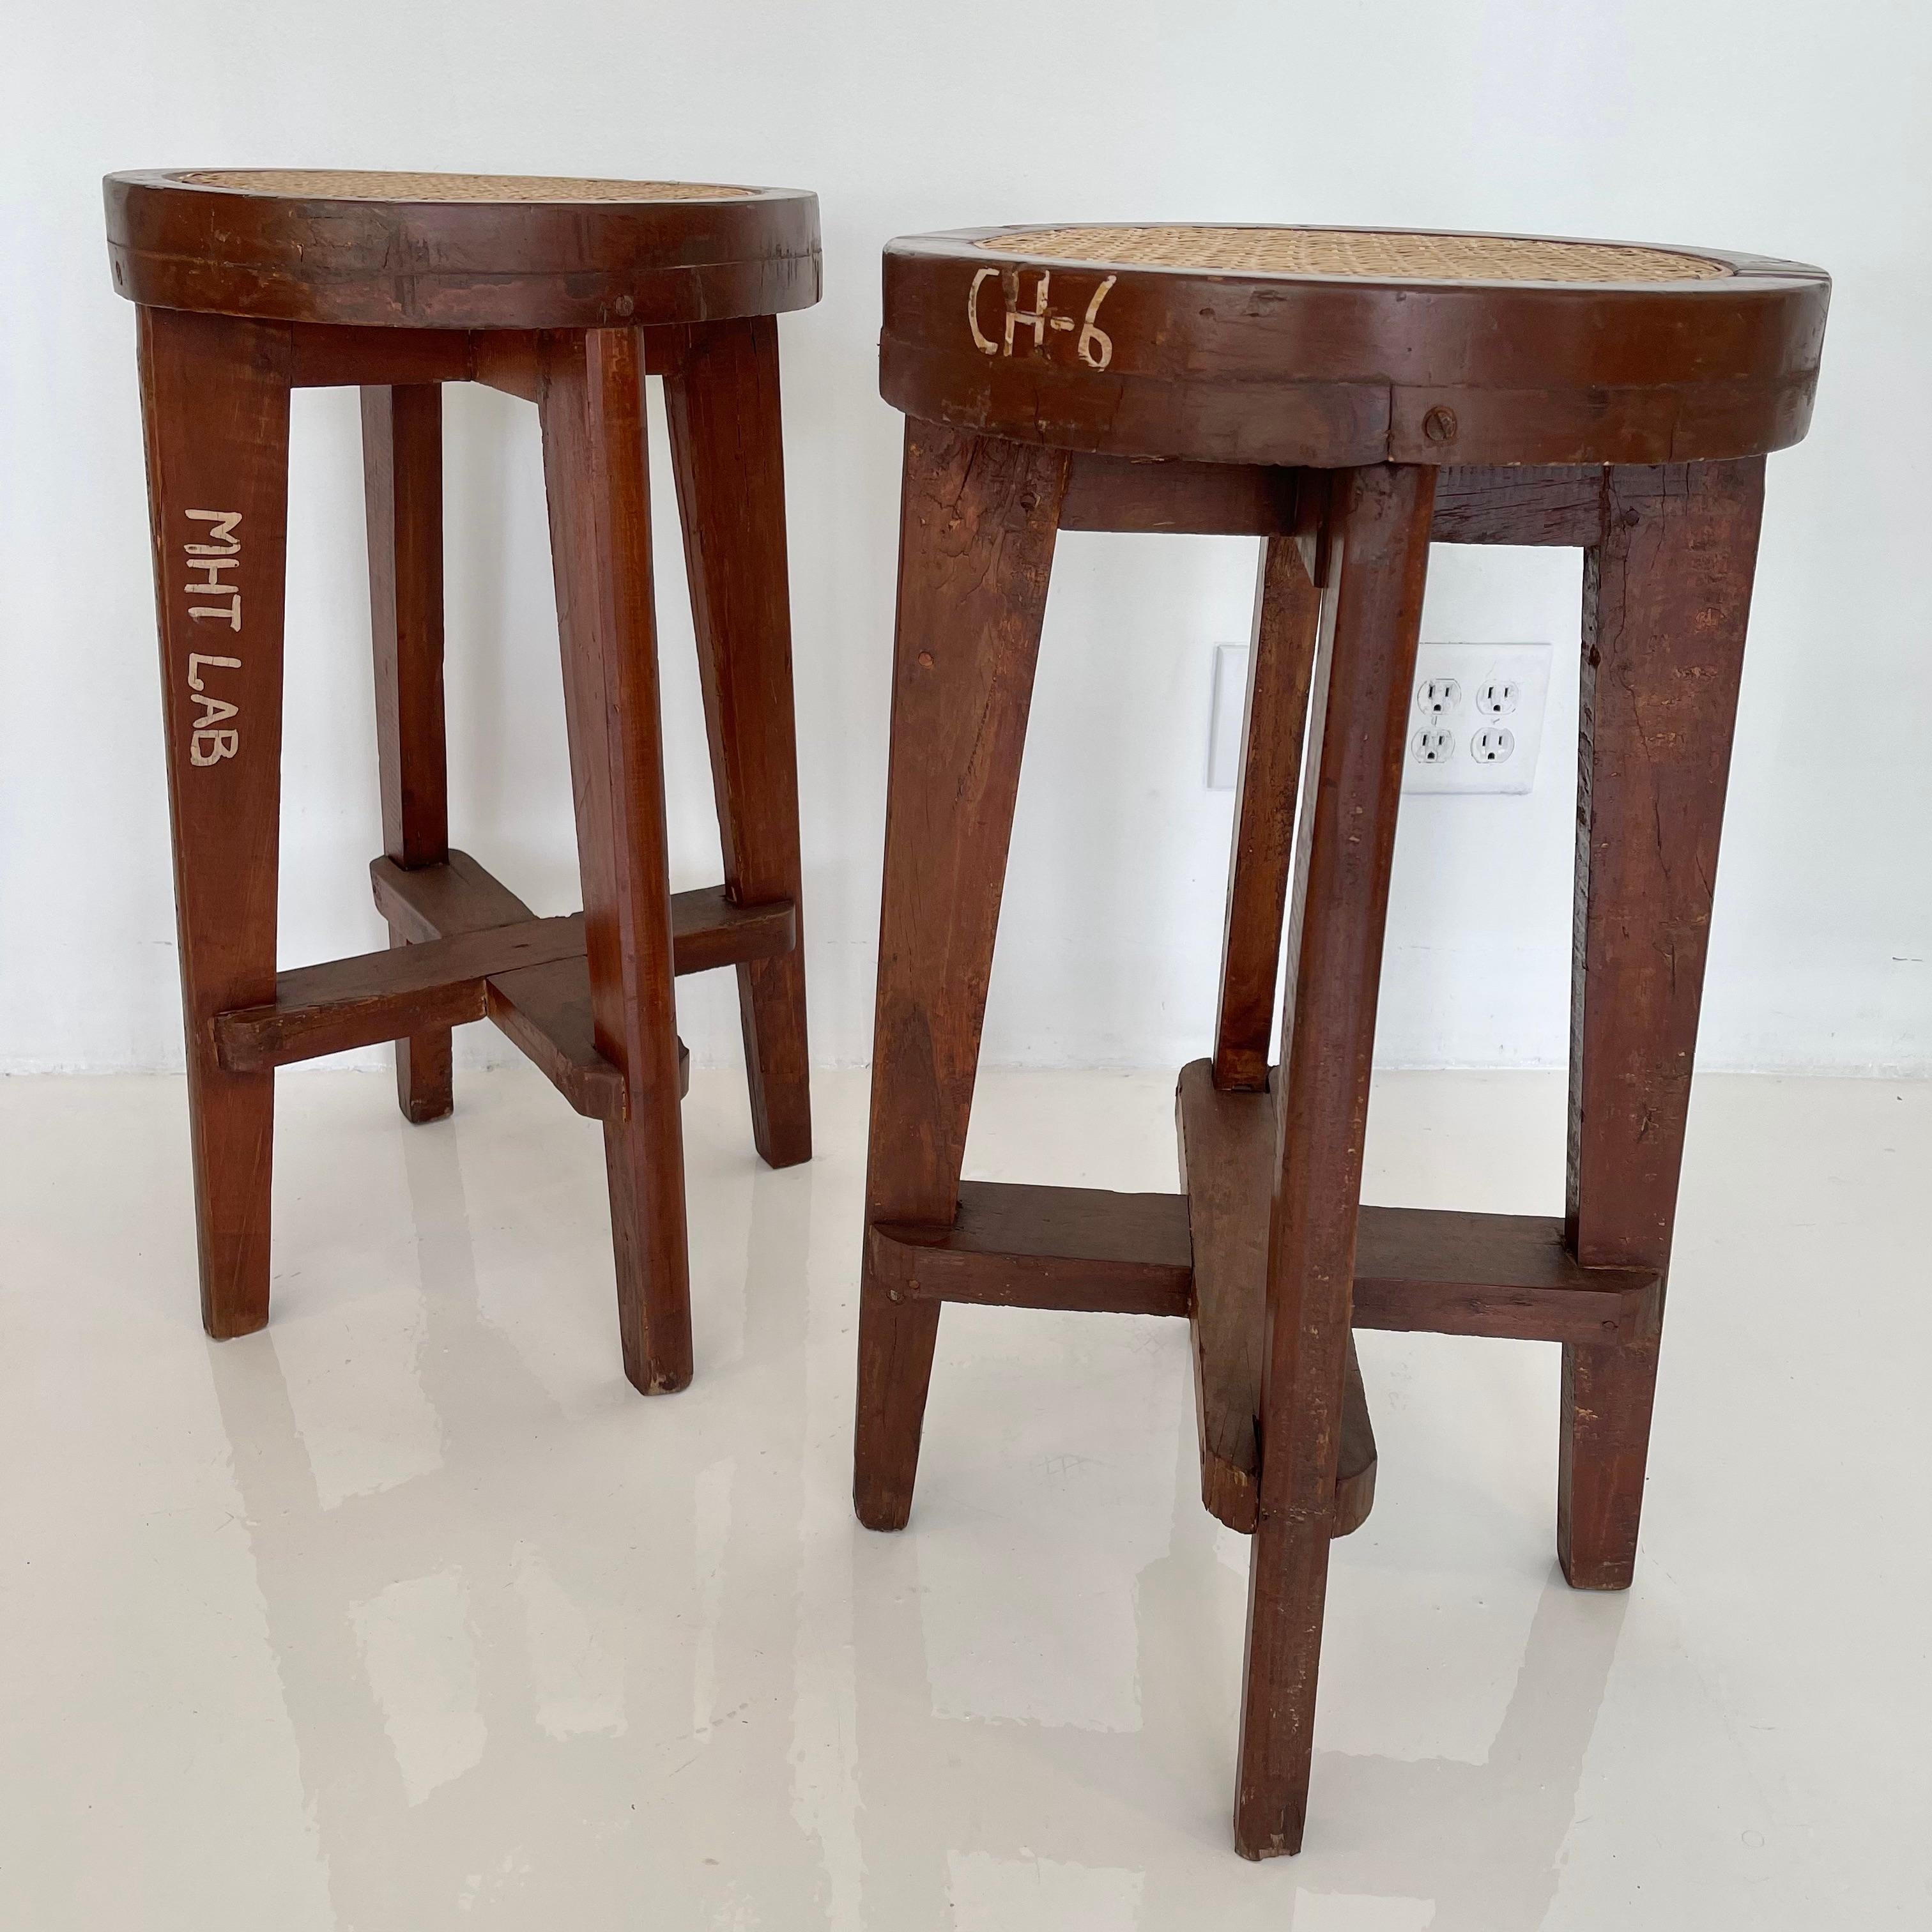 Stunning set of teak stools by Pierre Jeanneret. Model No. PJ-SI-21-A from Panjab University in Chandigarh. Teak stool with cane seat. Great condition. Various numbers and writings on each stool. 6 available. Priced individually.